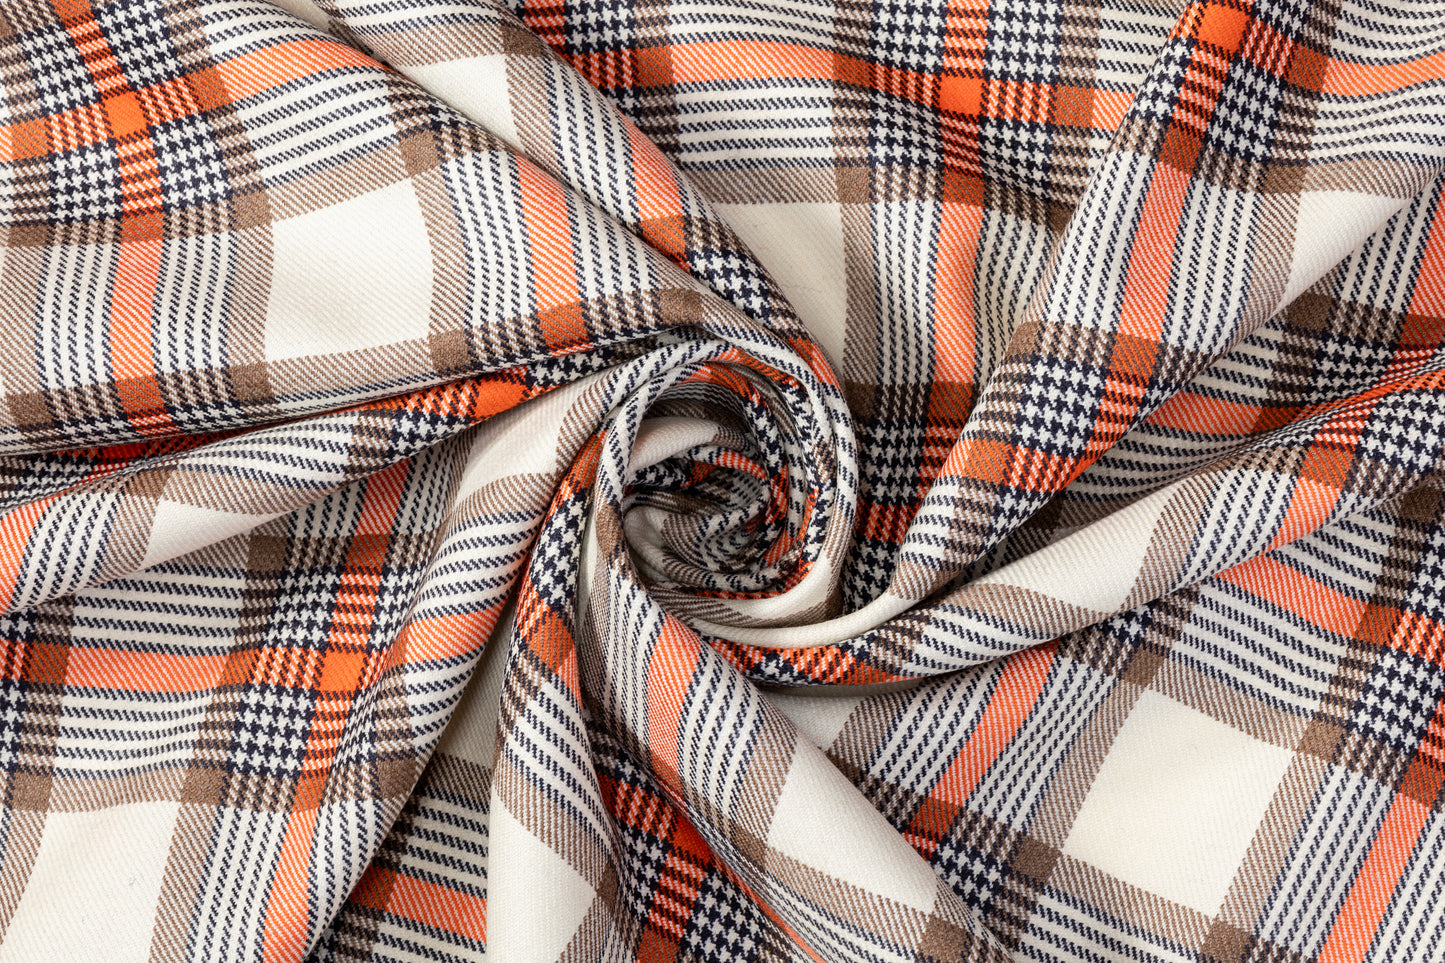 Checked Italian Wool Suiting - Orange / Brown / Ivory